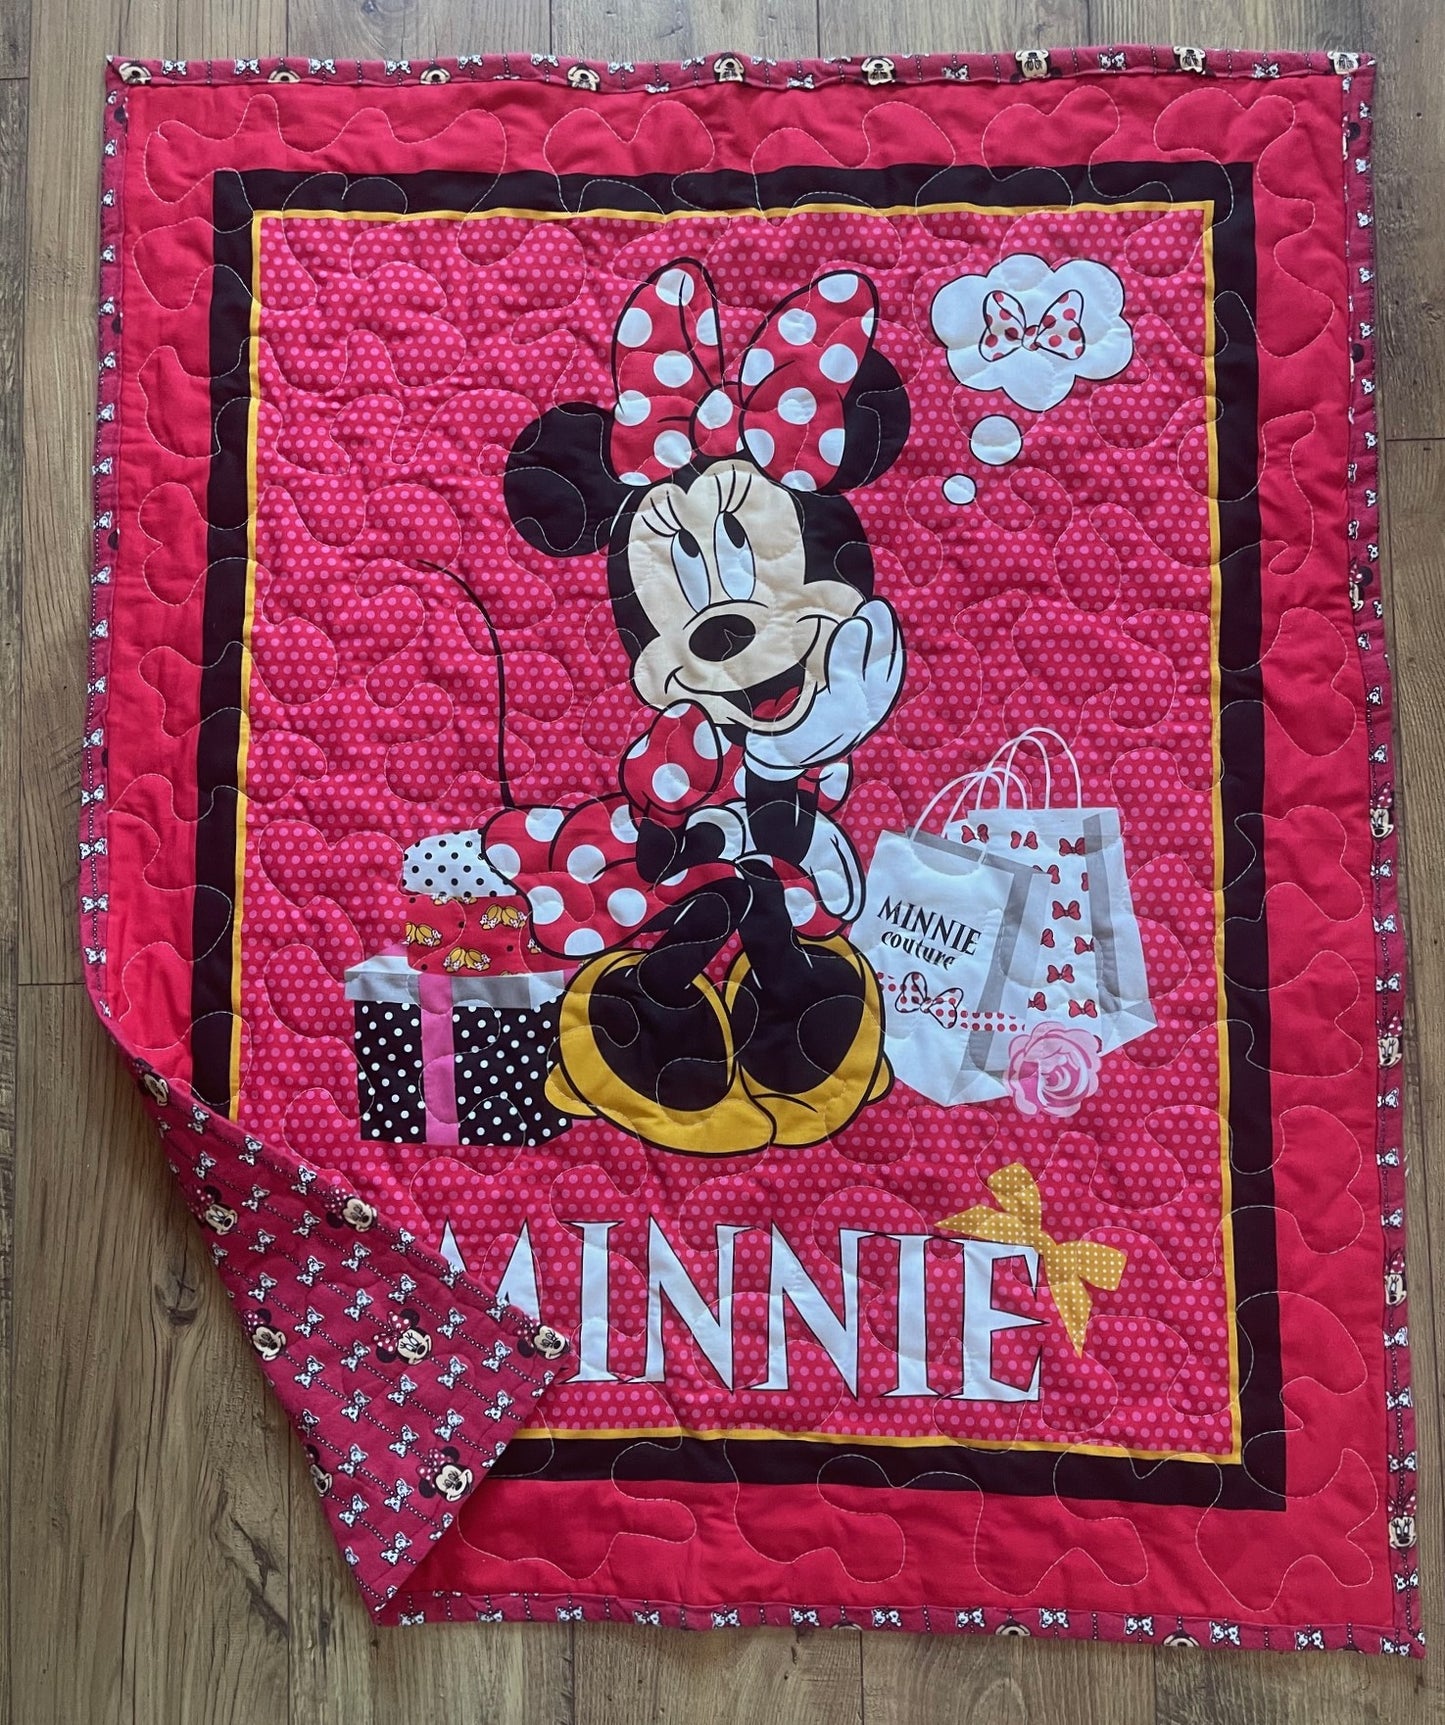 MINNIE MOUSE "MINNIE COUTURE" Inspired Quilted Blanket with Soft Flannel Backing Fabric